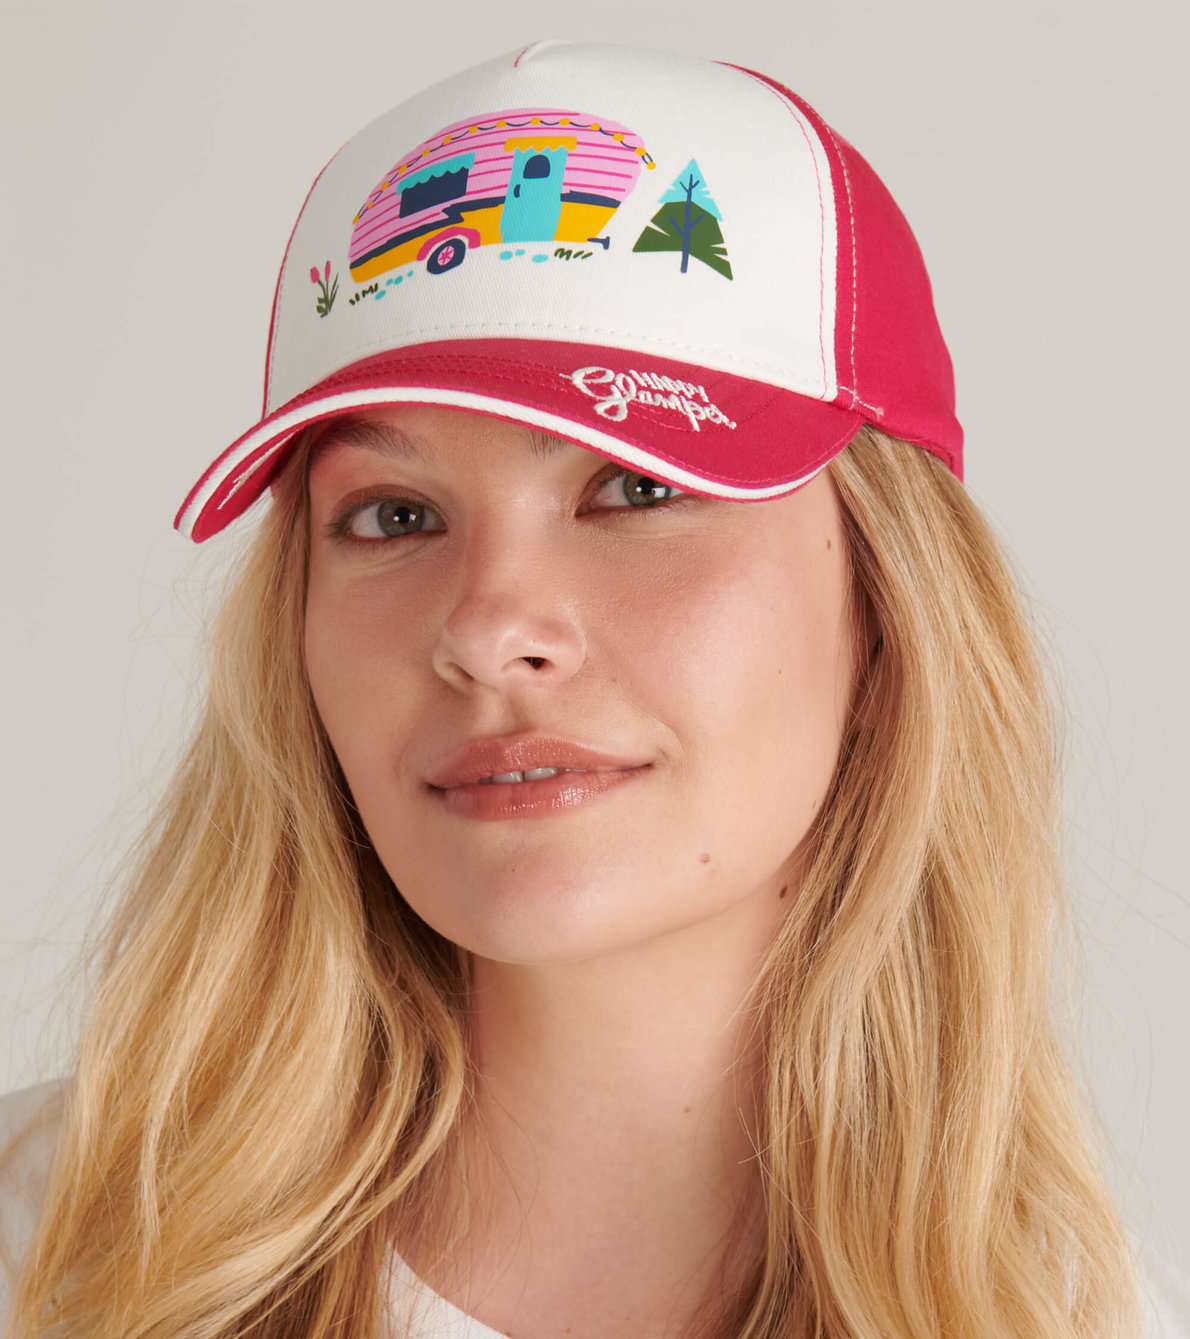 View larger image of Happy Glamper Adult Baseball Cap